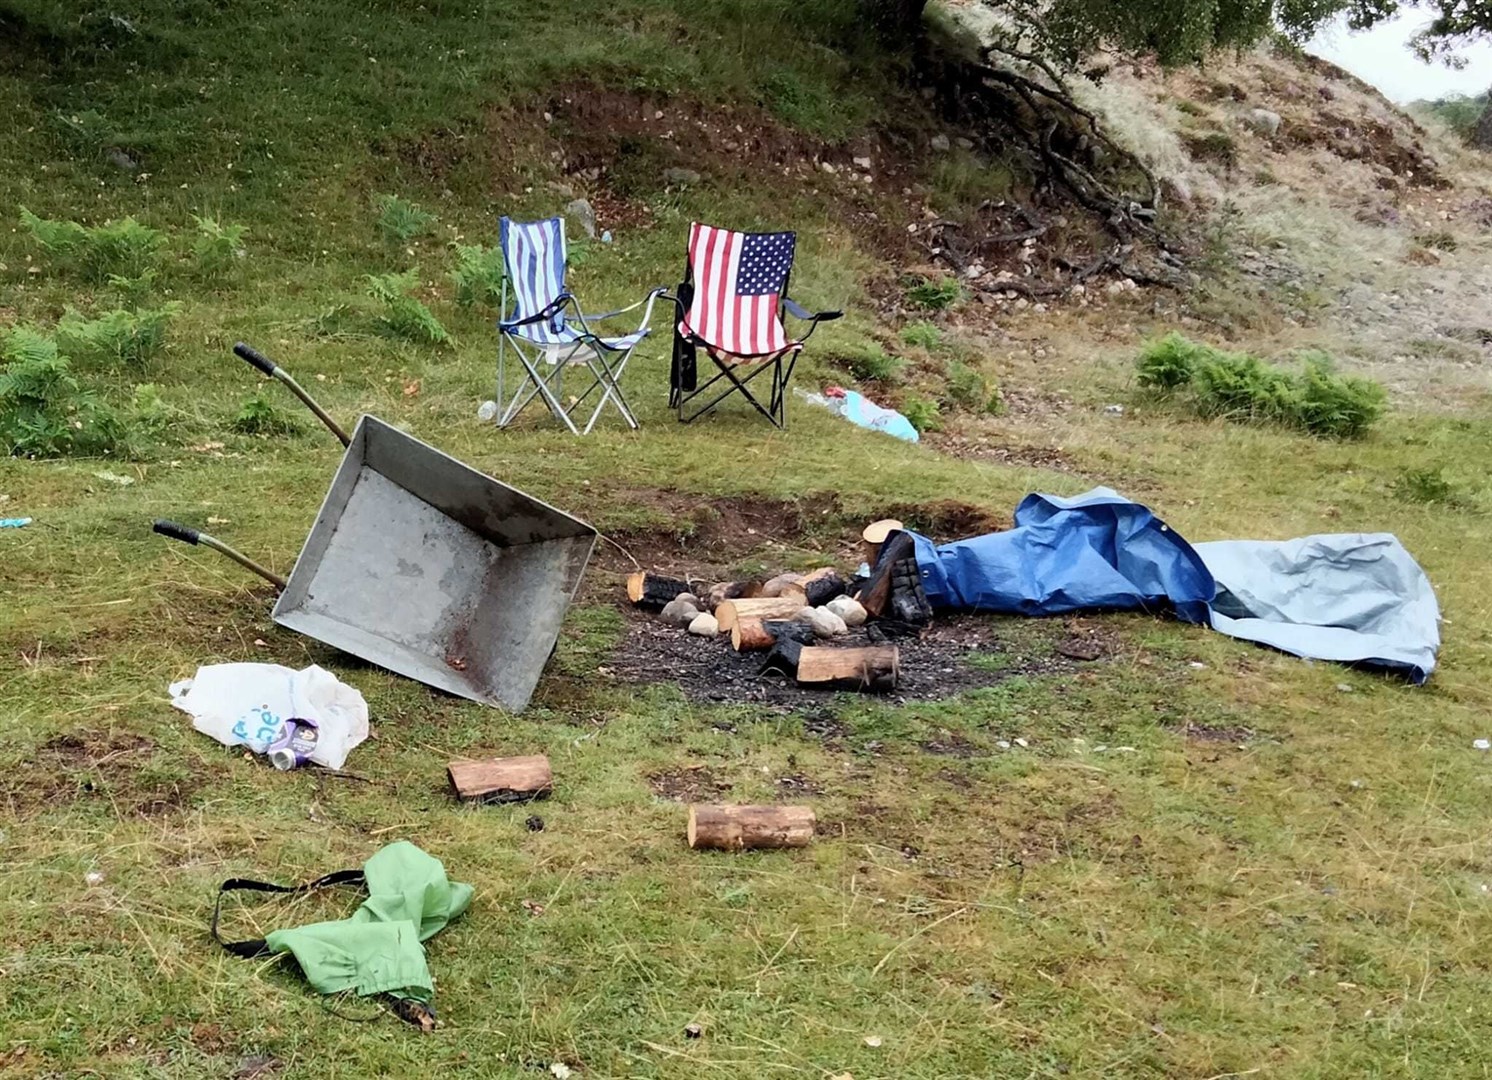 Dirty camping? This mess was spotted this morning by Loch Insh